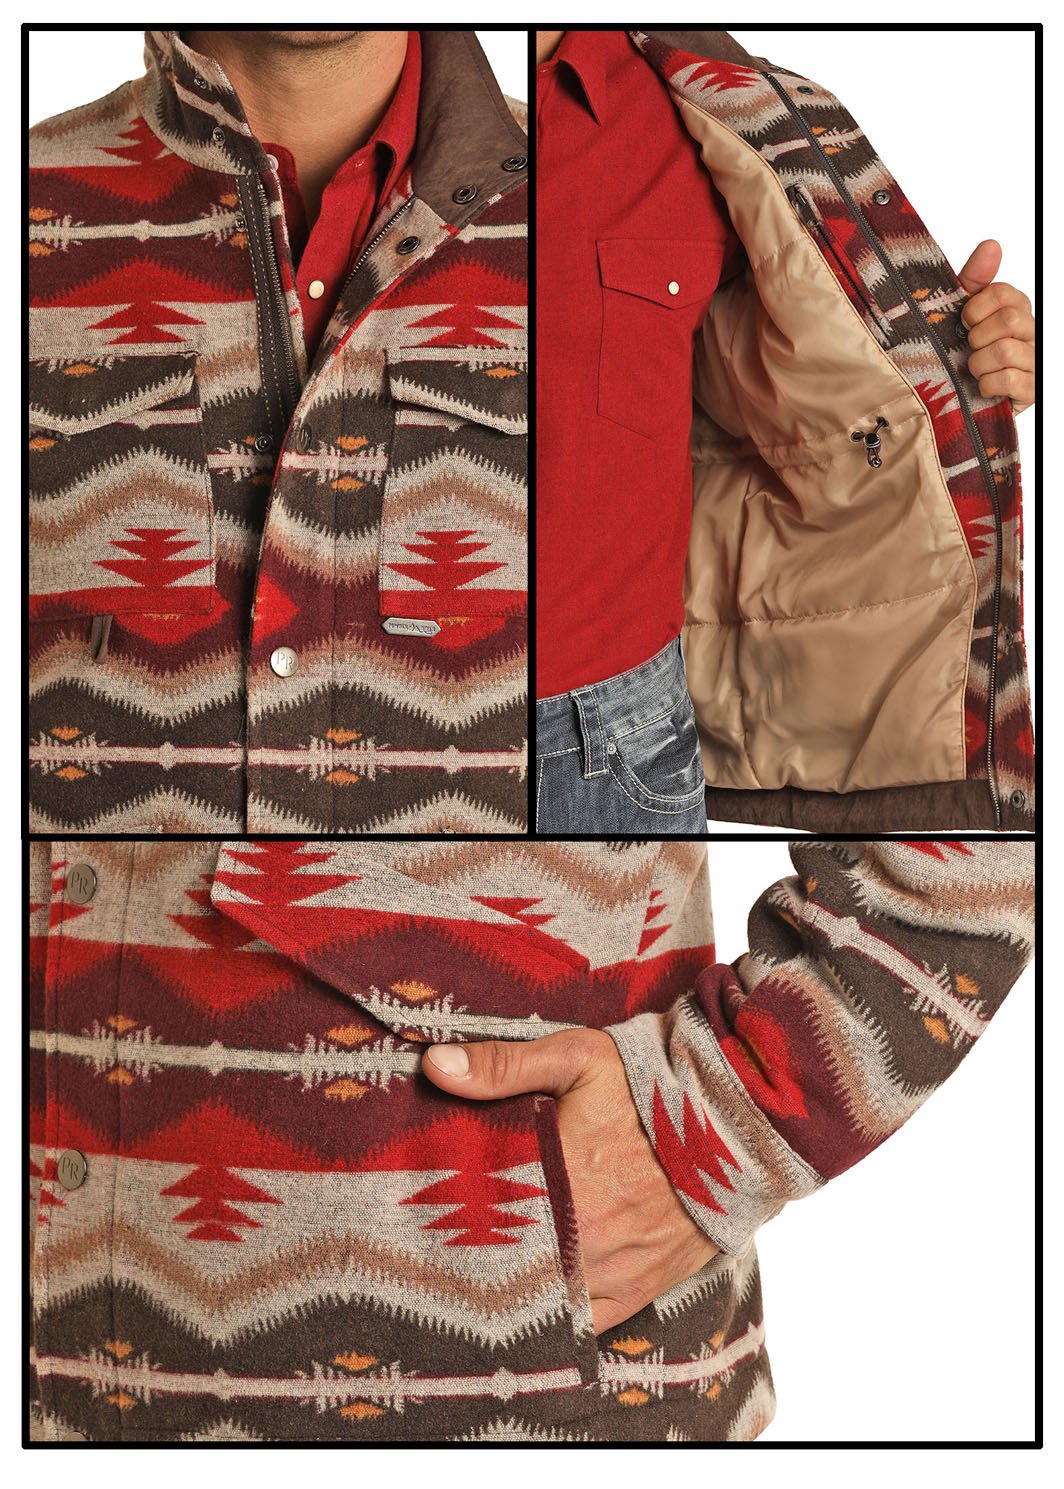 Powder River Outfitters Men's Red Aztec Wool Blend Jacket | eBay